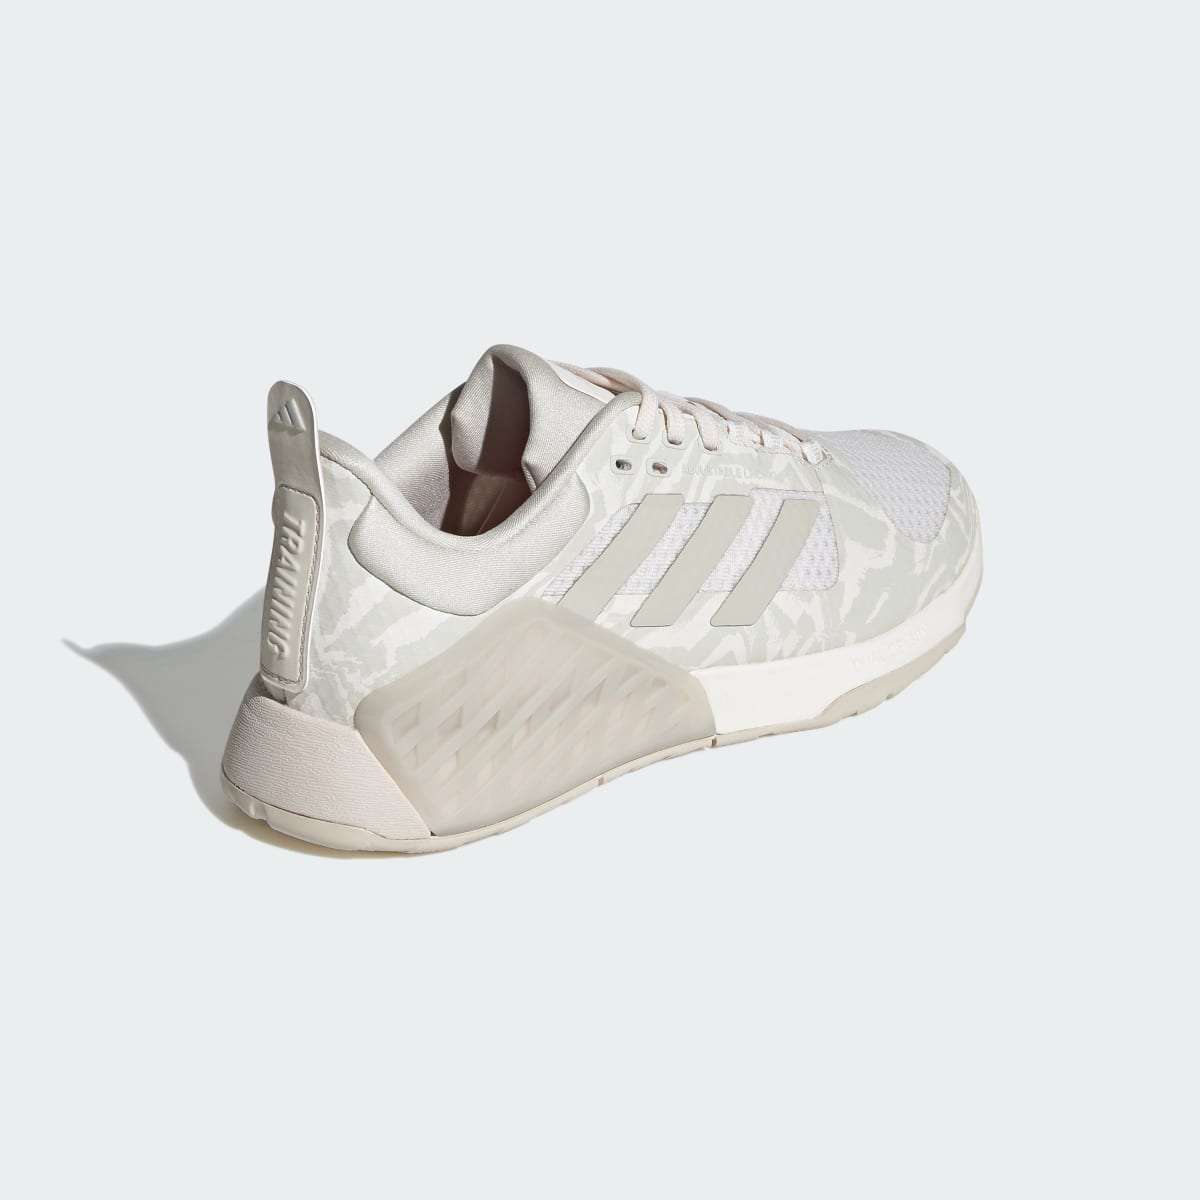 Adidas Dropset 2 Trainers. 9